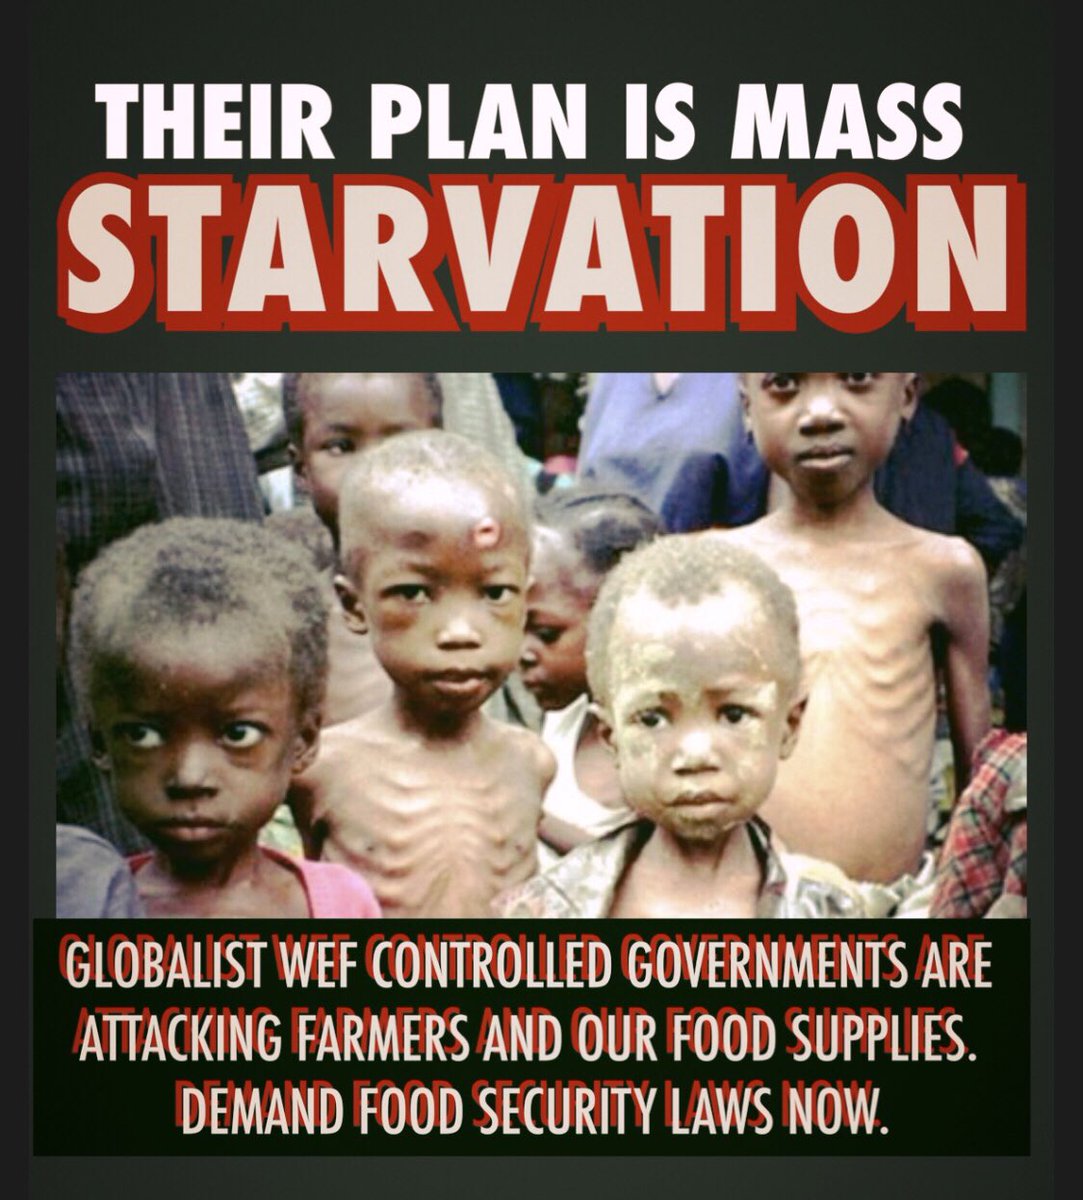 The Plan is Mass Starvation! Globalist WEF UN WHO controlled governments are attacking farmers and our food supplies. Demand an end to geoengineering. Demand an end to Agenda 2030 & the climate scam. Demand that traitor politicians & media be arrested for treason! #agenda20230